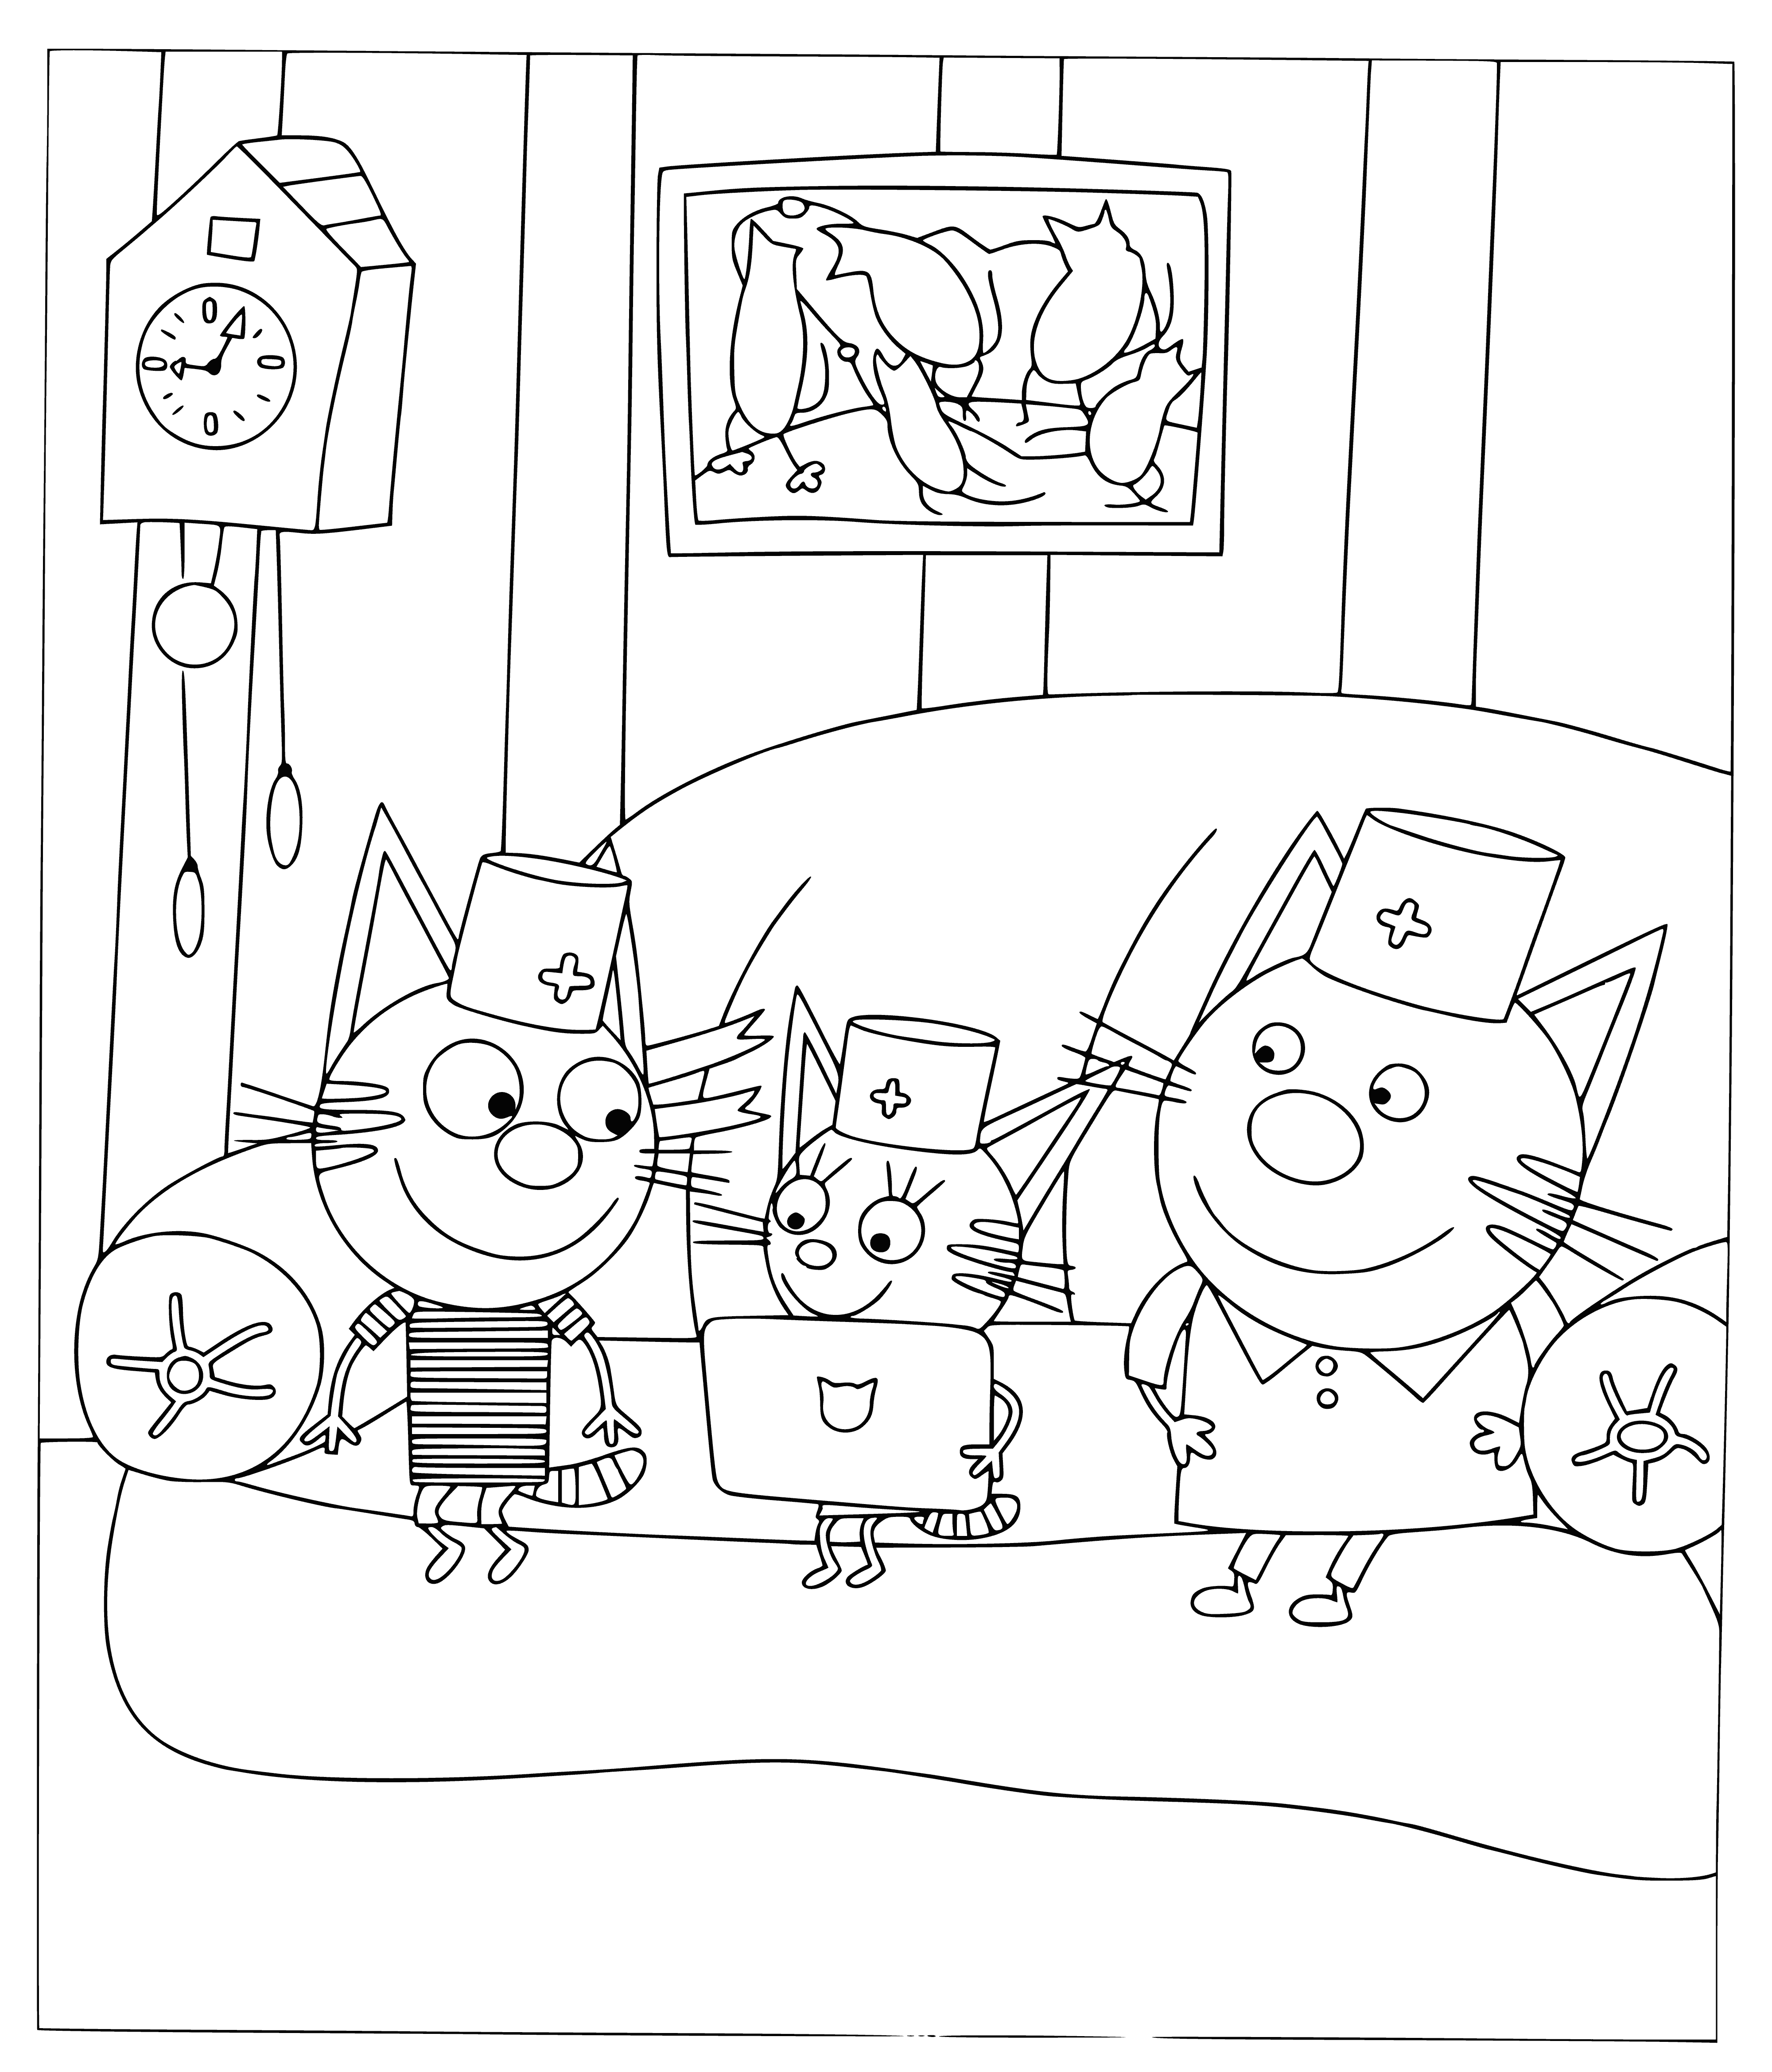 coloring page: 3 cats: 2 kittens playing doctor (1 w/ stethoscope, 1 w/ thermometer); 1 adult sitting nearby. #coloringpage